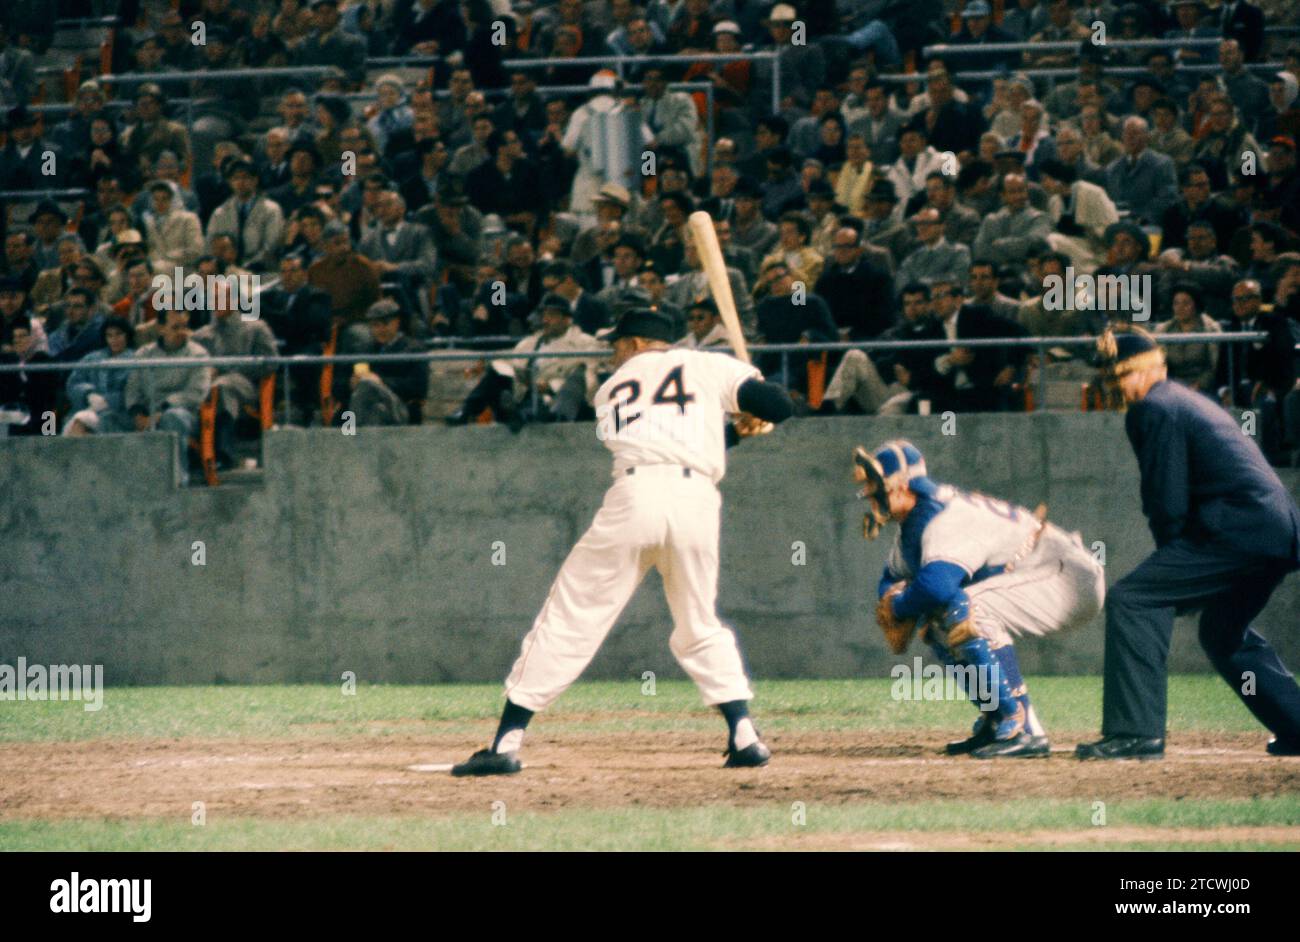 SAN FRANCISCO, CA - MAY, 1960:  Willie Mays #24 of the San Francisco Giants bats during an MLB game against the Chicago Cubs circa May, 1960 at Candlestick Park in San Francisco, California.  (Photo by Hy Peskin) *** Local Caption *** Willie Mays Stock Photo